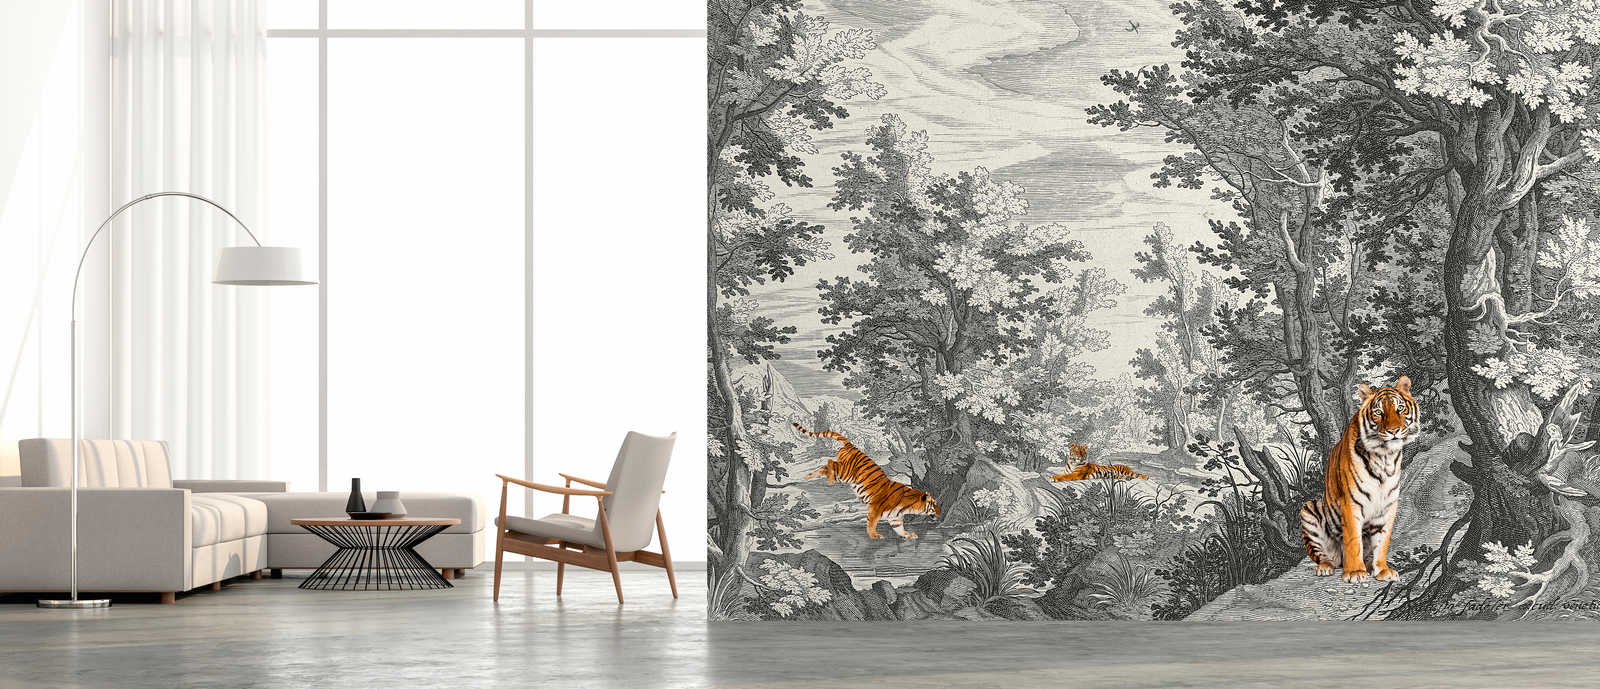             Fancy Forest 2 - wall mural landscape classic with tiger
        